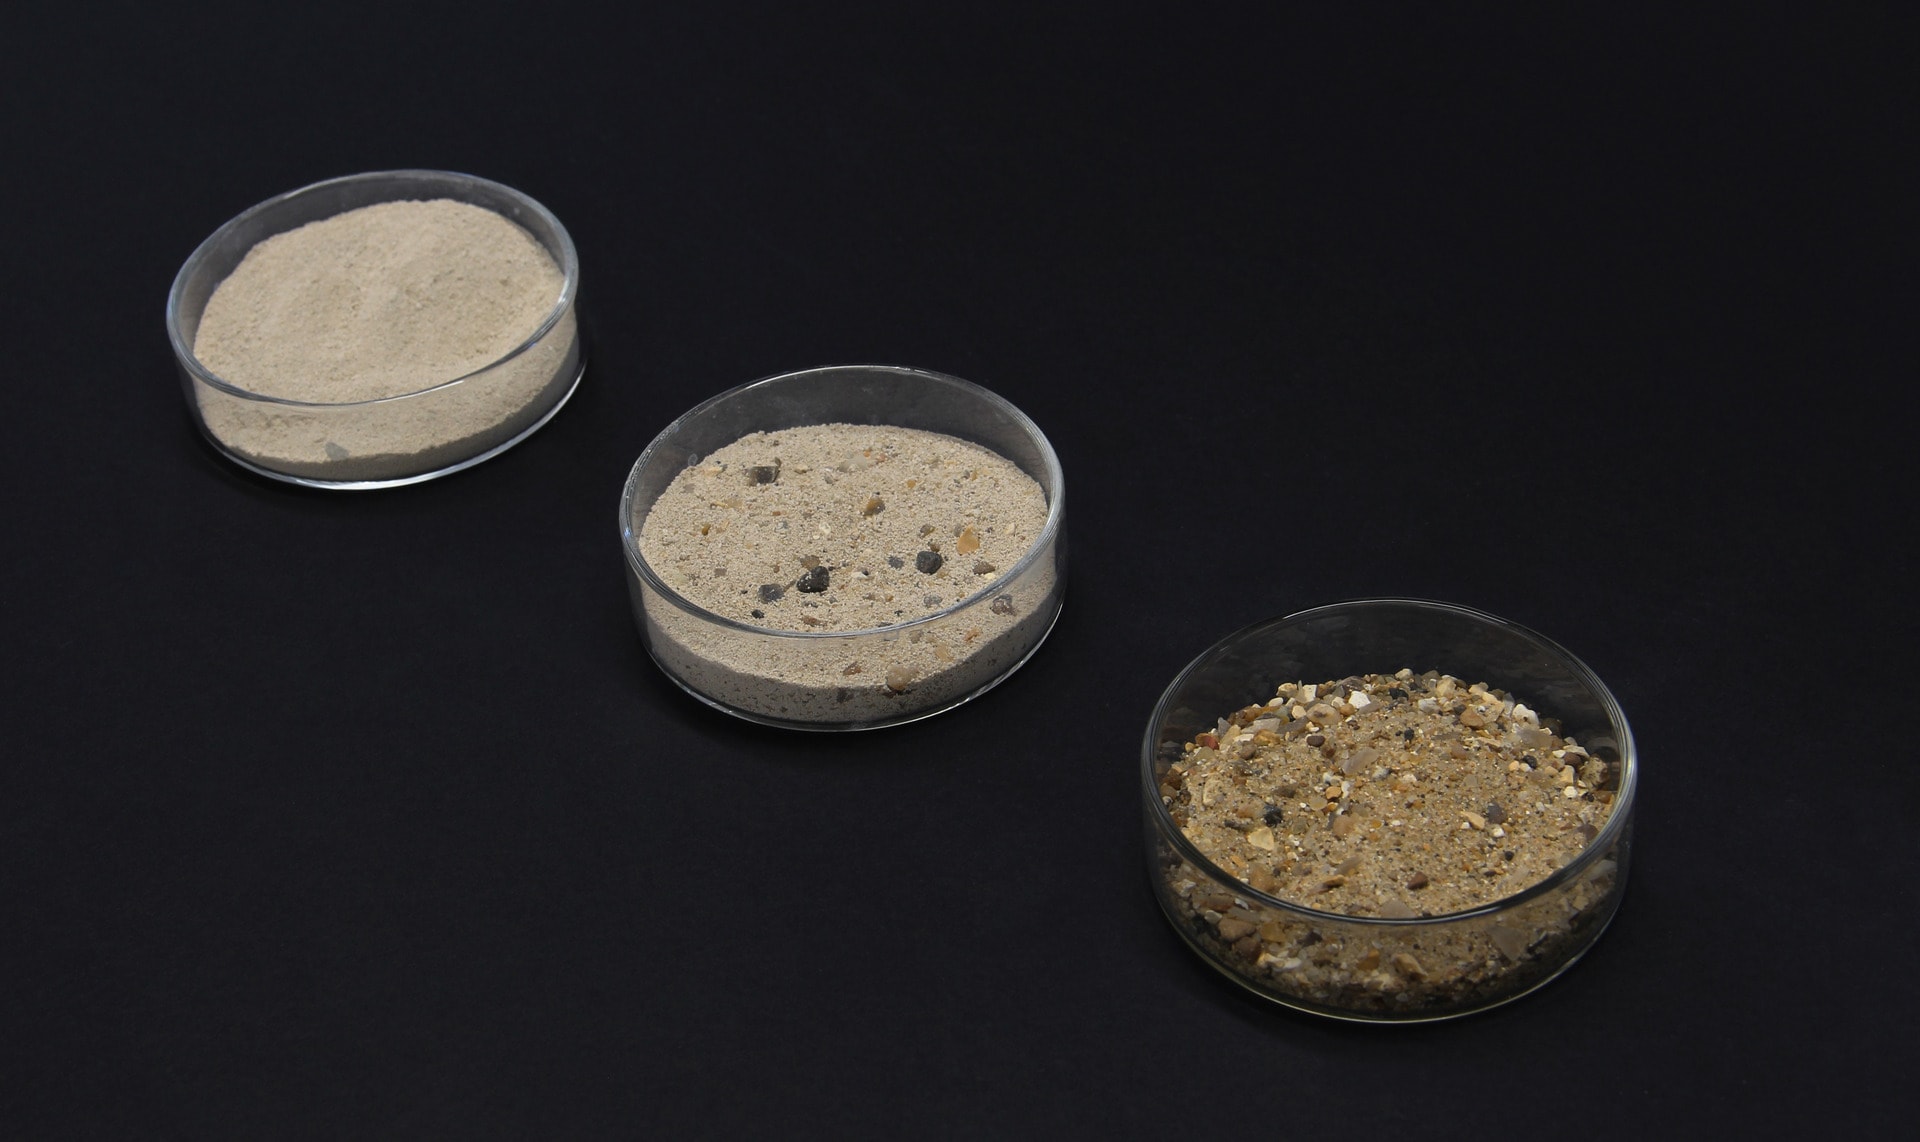 Sand, oyster shell and their mixtures in petri dishes